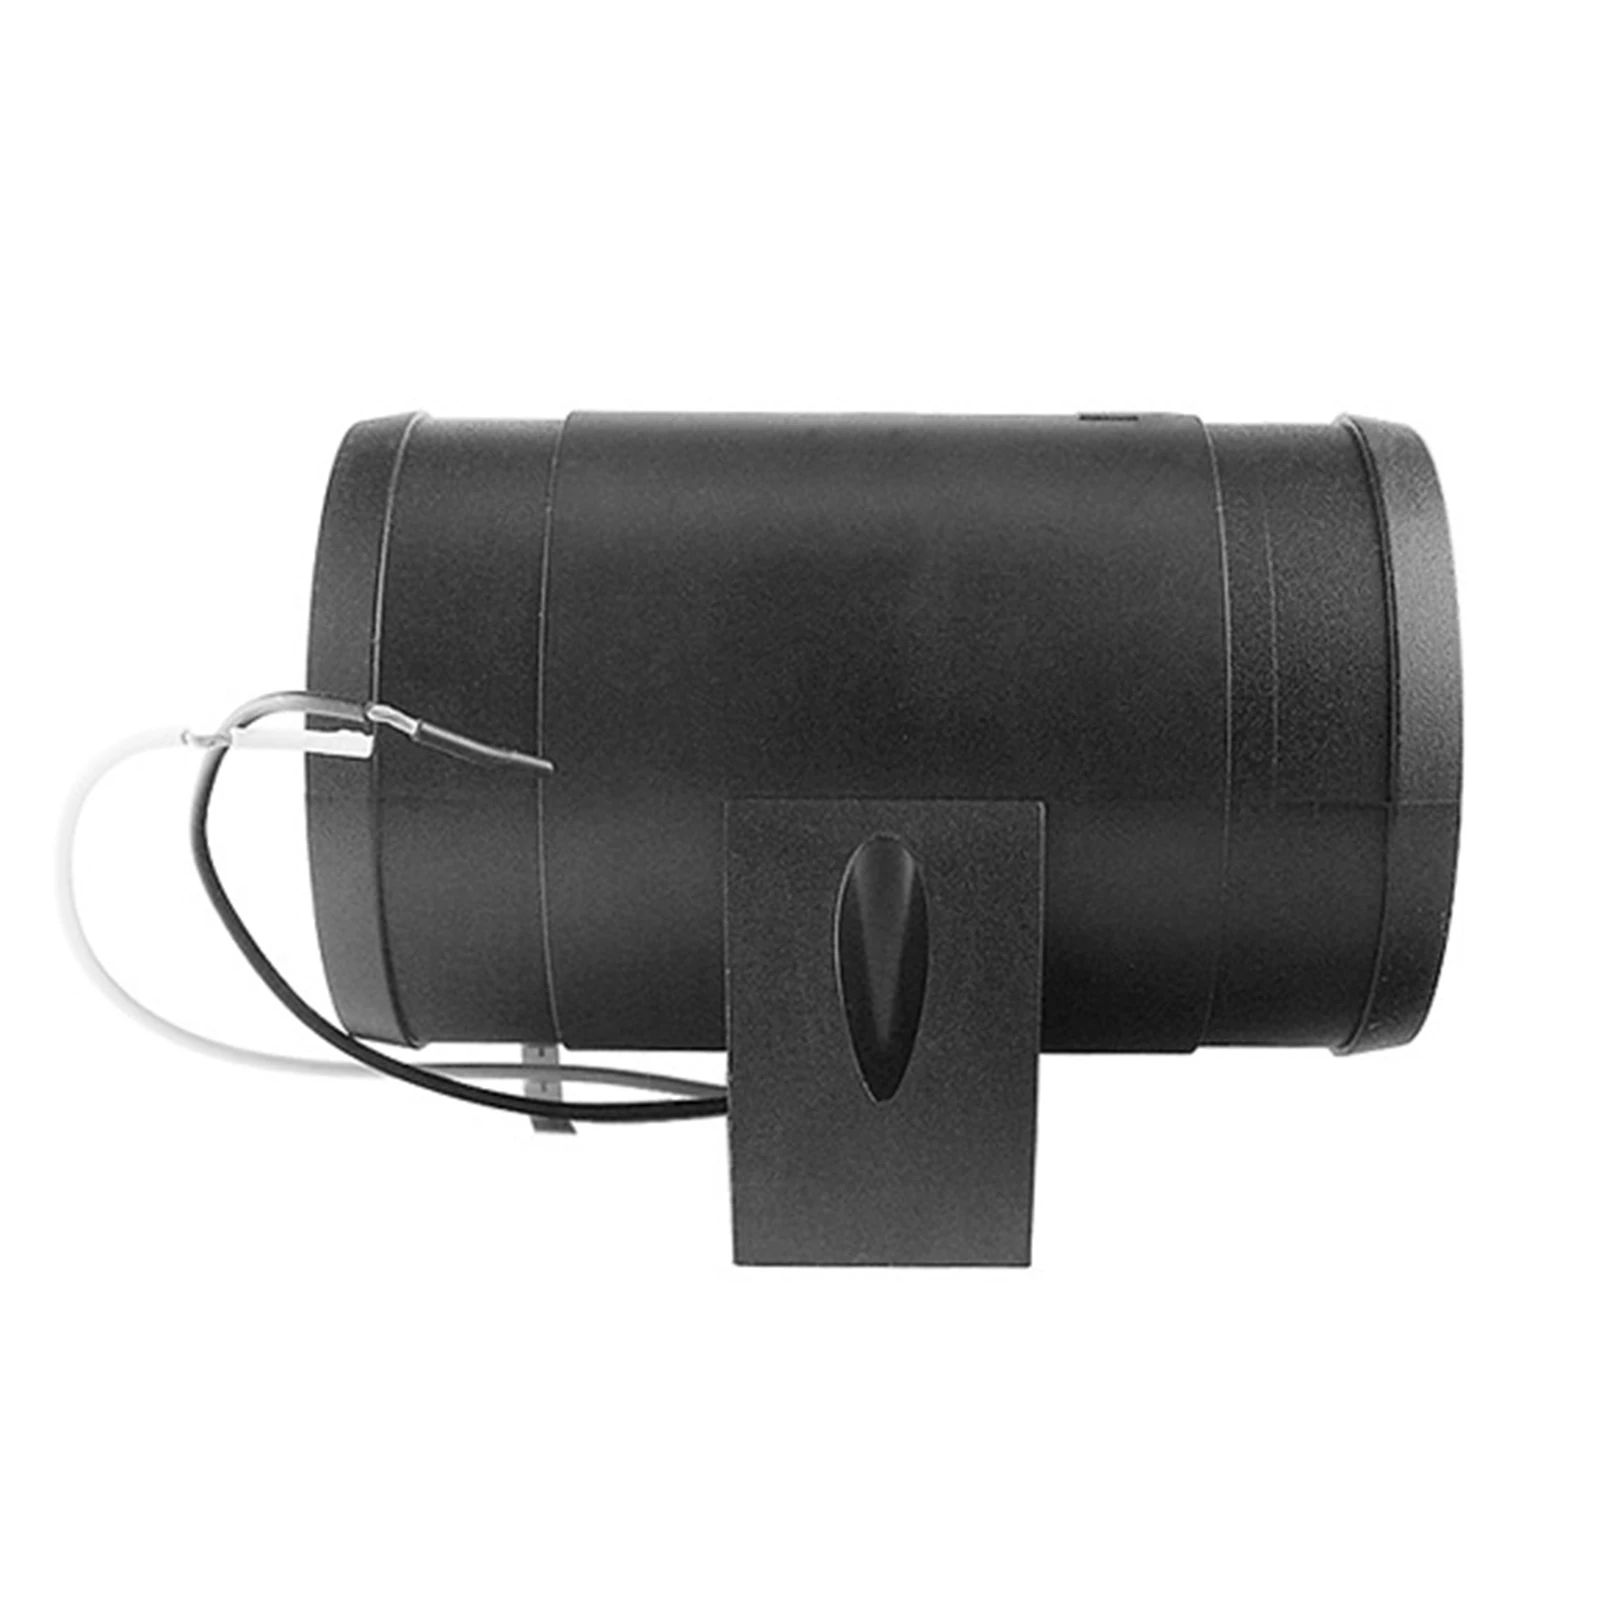 Marine Duct Fan 12V Bilge Blower Exhaust Fan 5-Blade Engine Room Fans Moisture-Protective Easy To Install Black Blower High